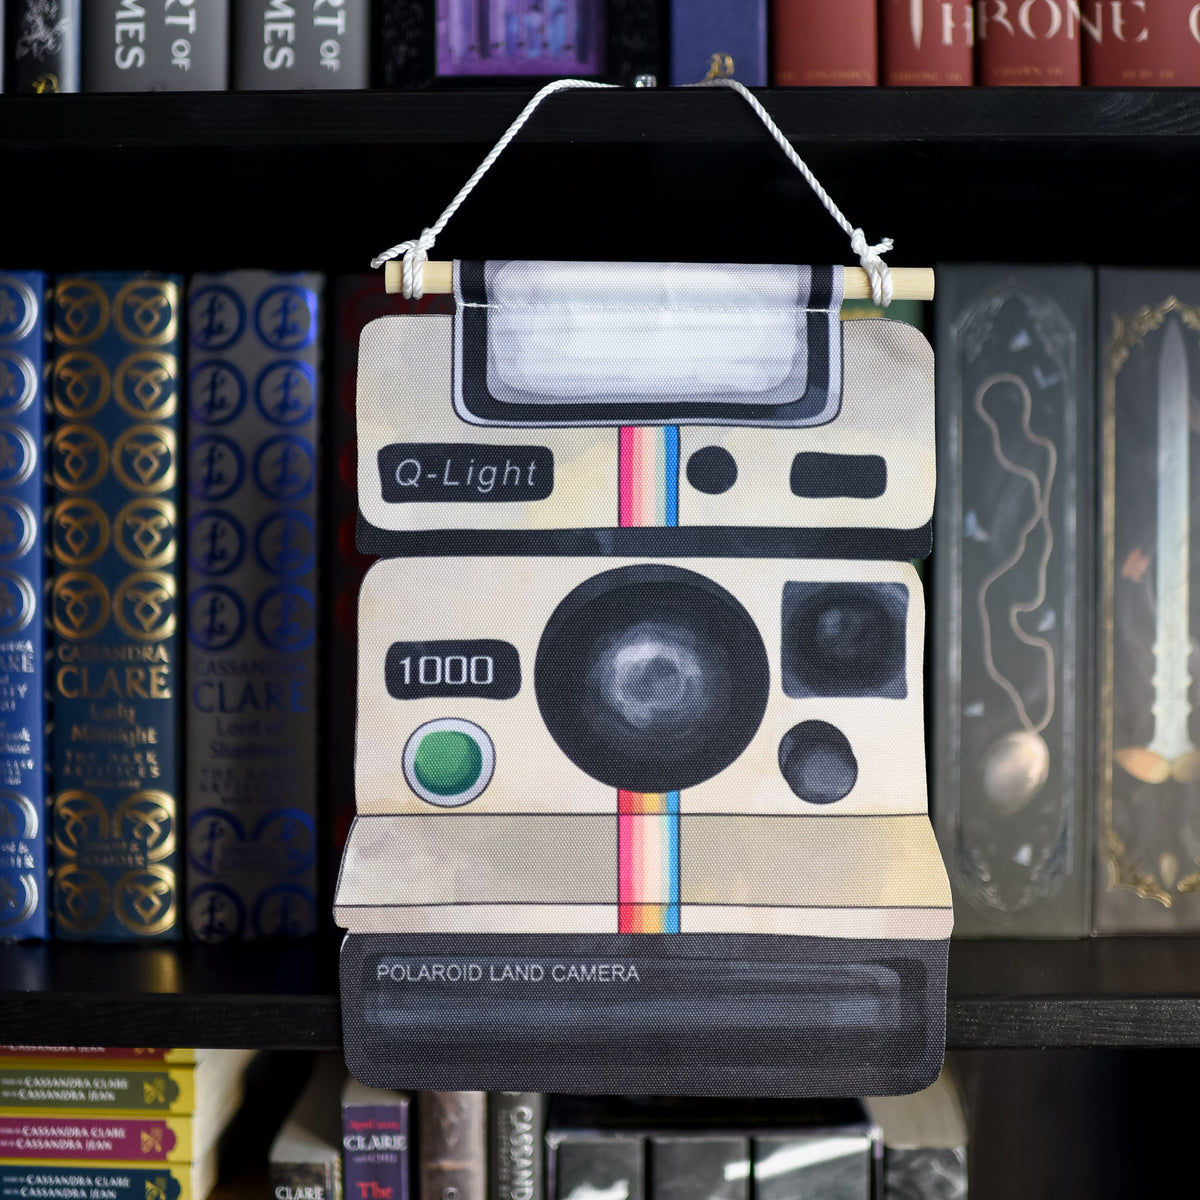 PIN BANNER - Polaroid Camera from LitJoy Crate | Collectibles &amp; Gifts for Booklovers